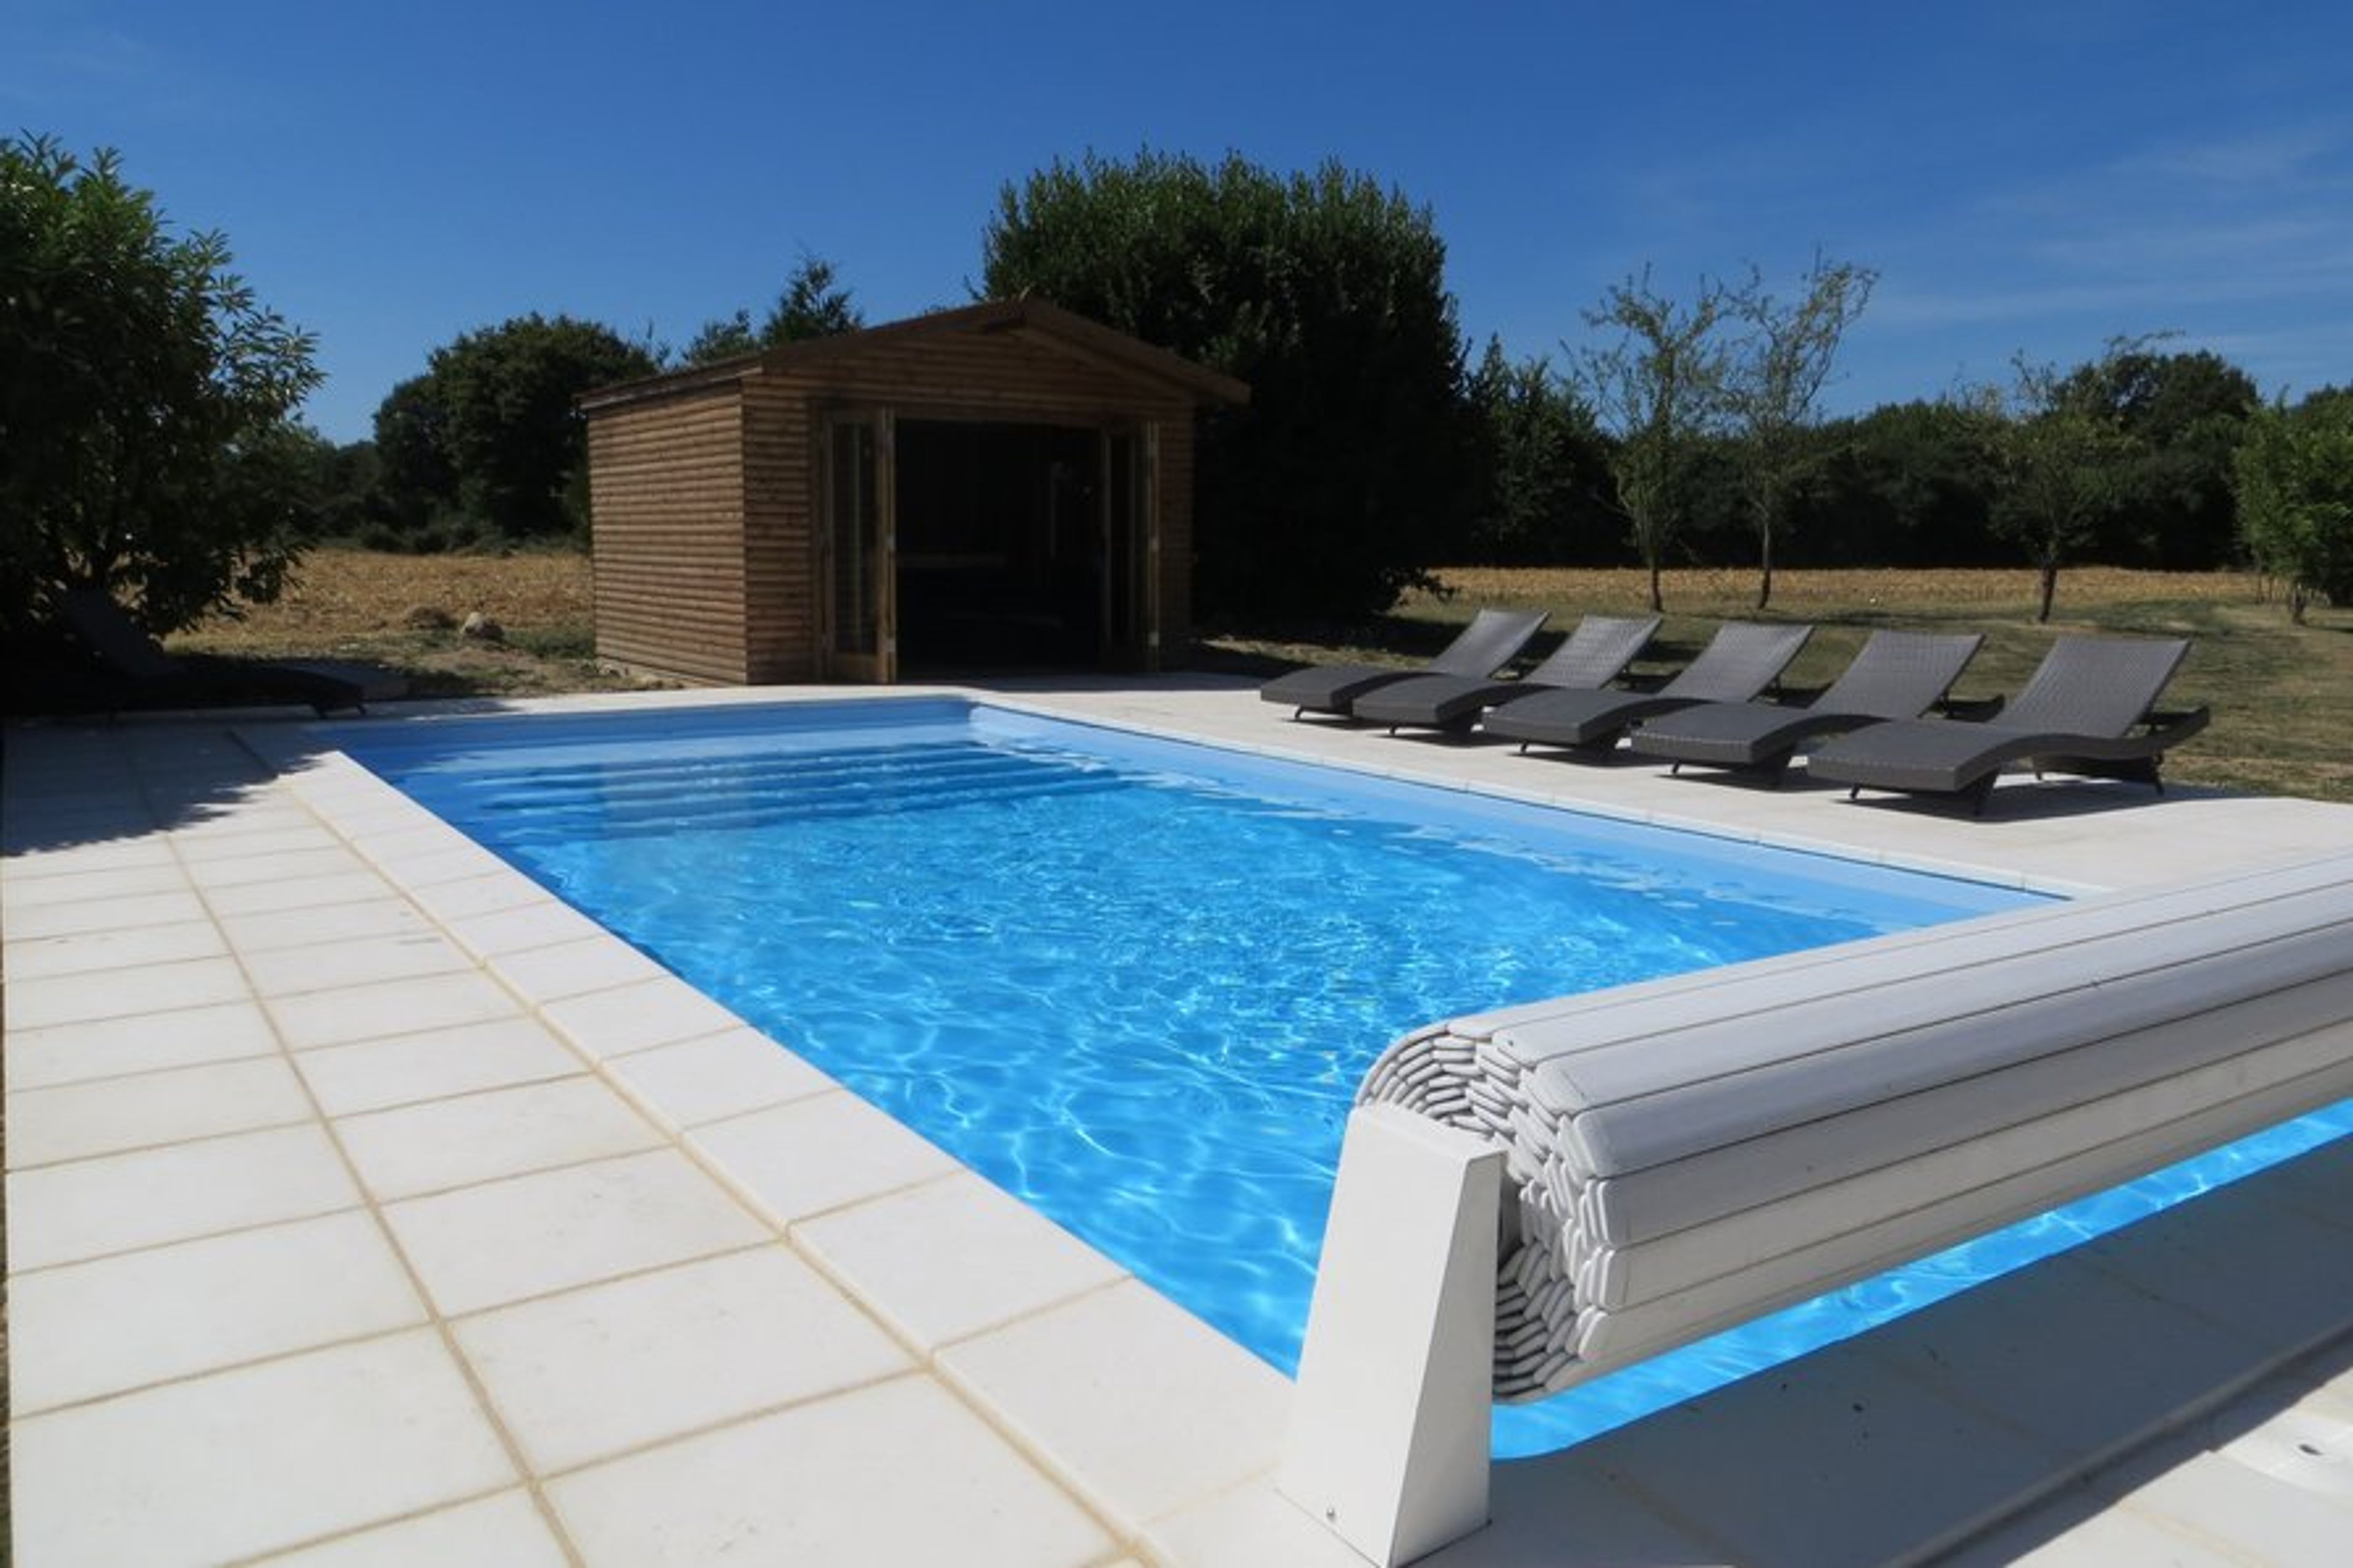 Heated swimming pool with automatic water management. 9M x4M x1.5M
